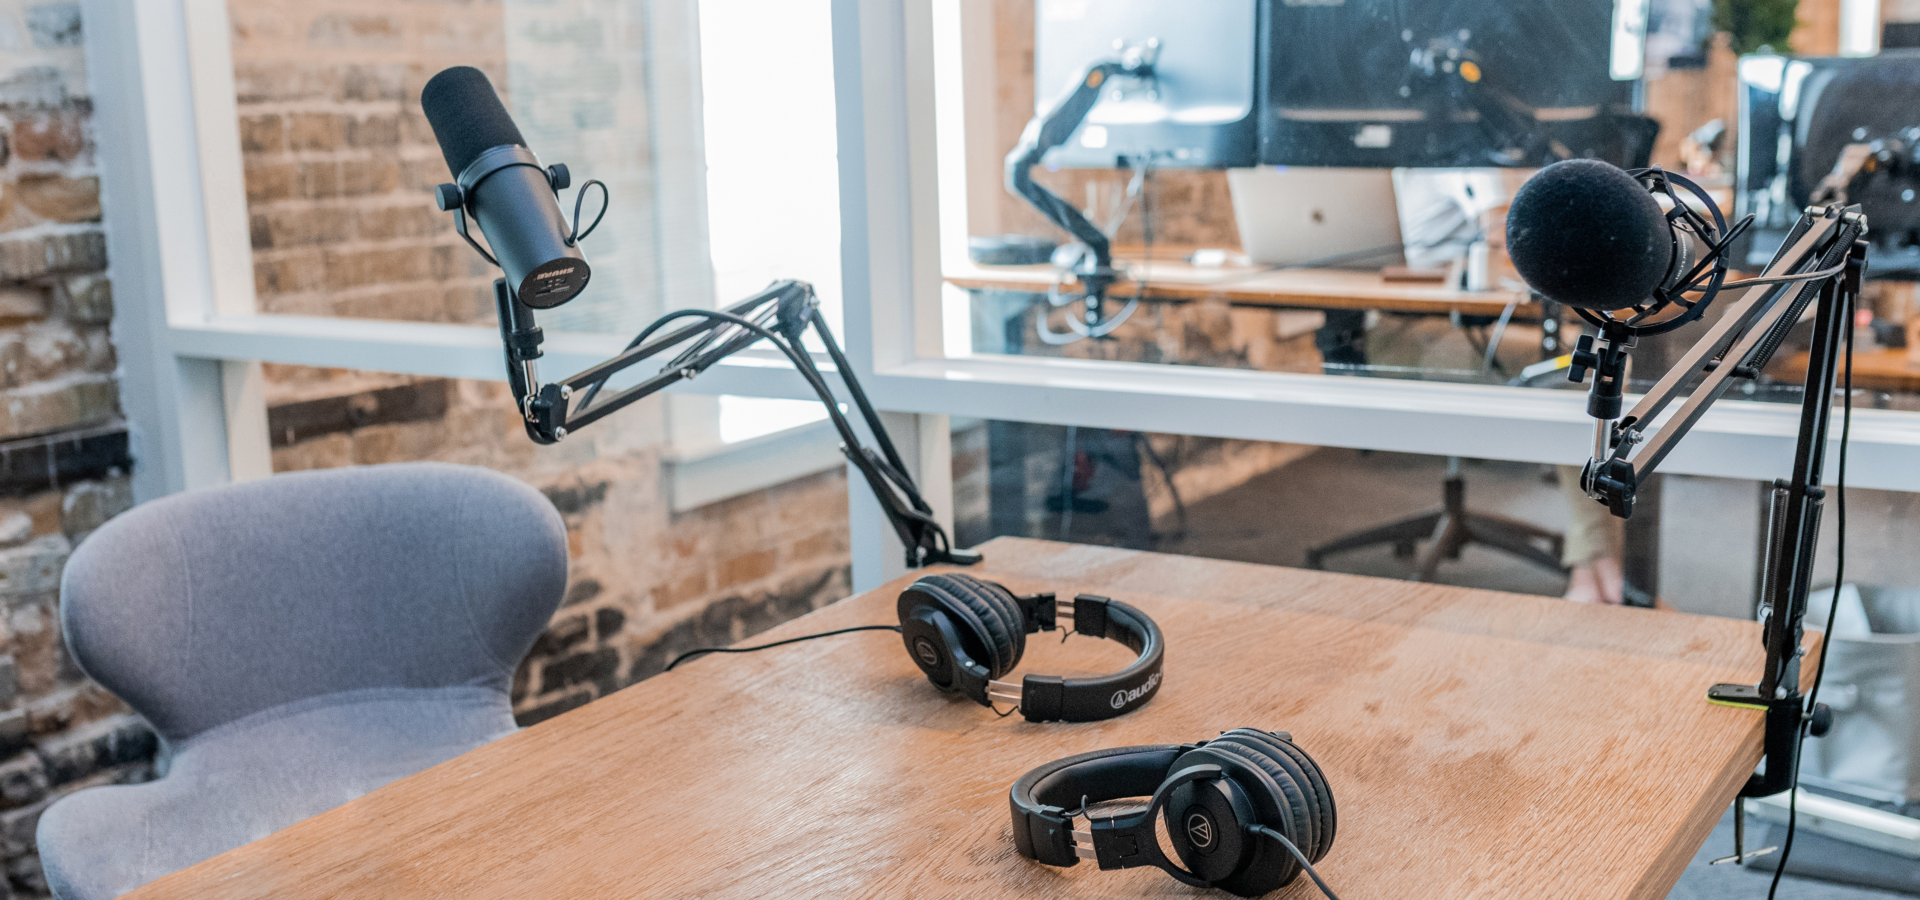 A pair of microphones and headsets on a desk in an empty studio.